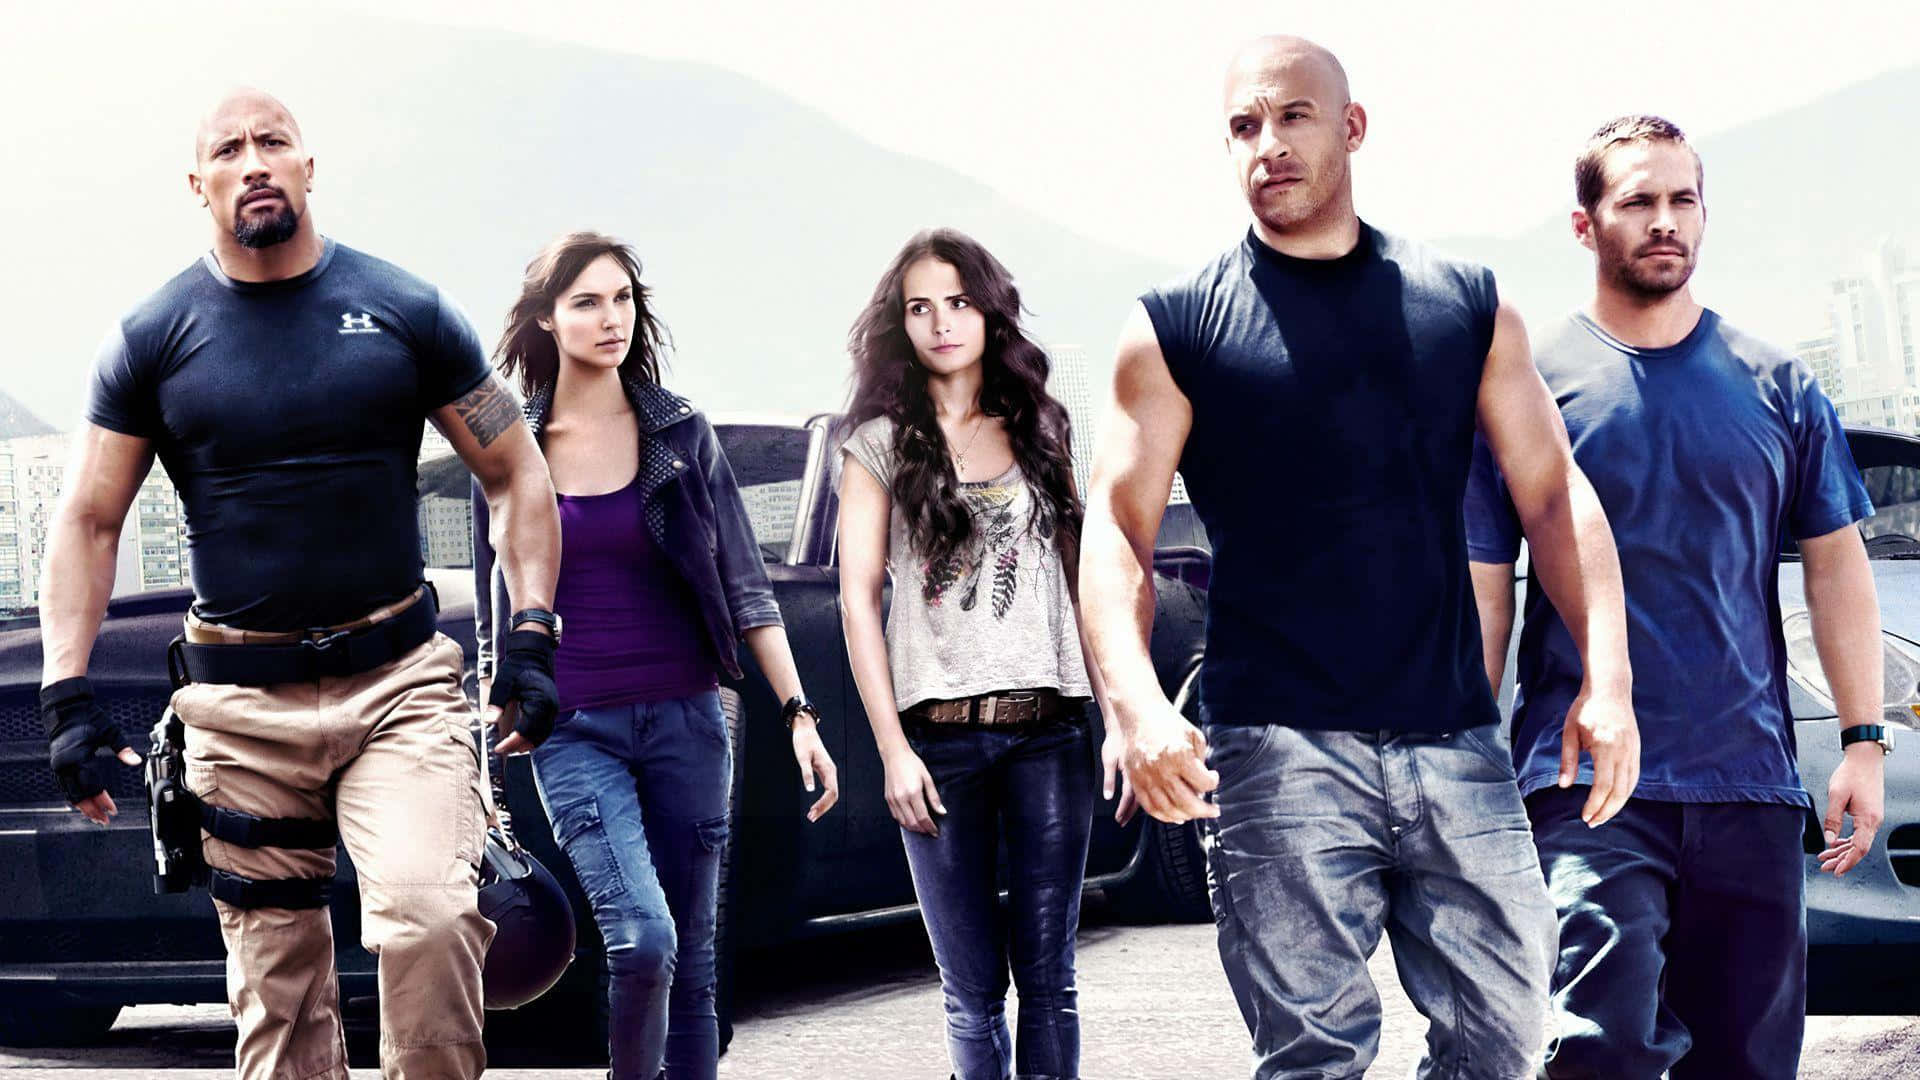 Unlock the spirit of high-speed with Cool Fast and Furious! Wallpaper